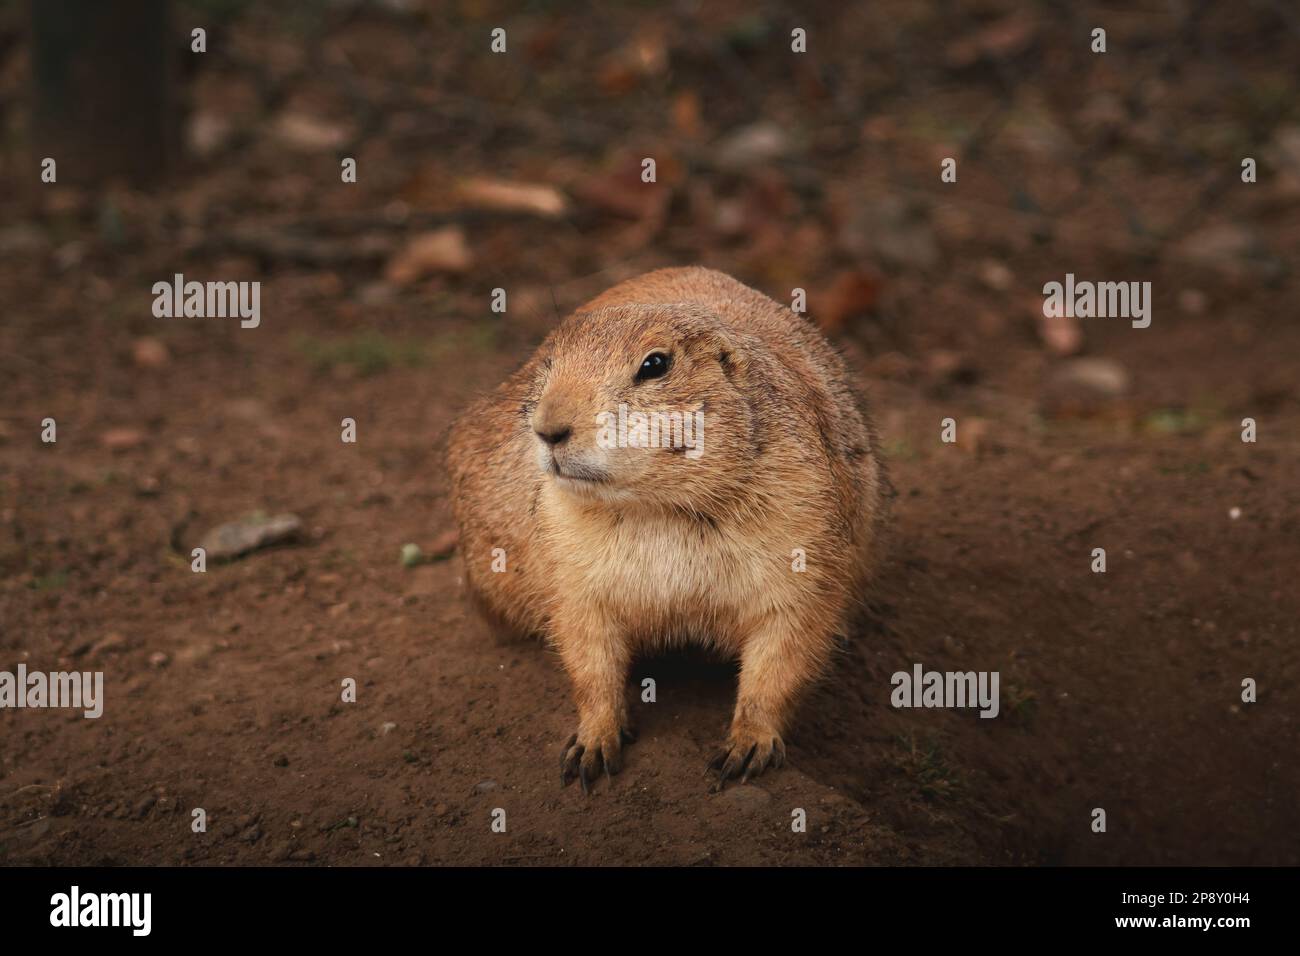 Curious Critter: A Playful Prairie Dog Peeks Out Stock Photo